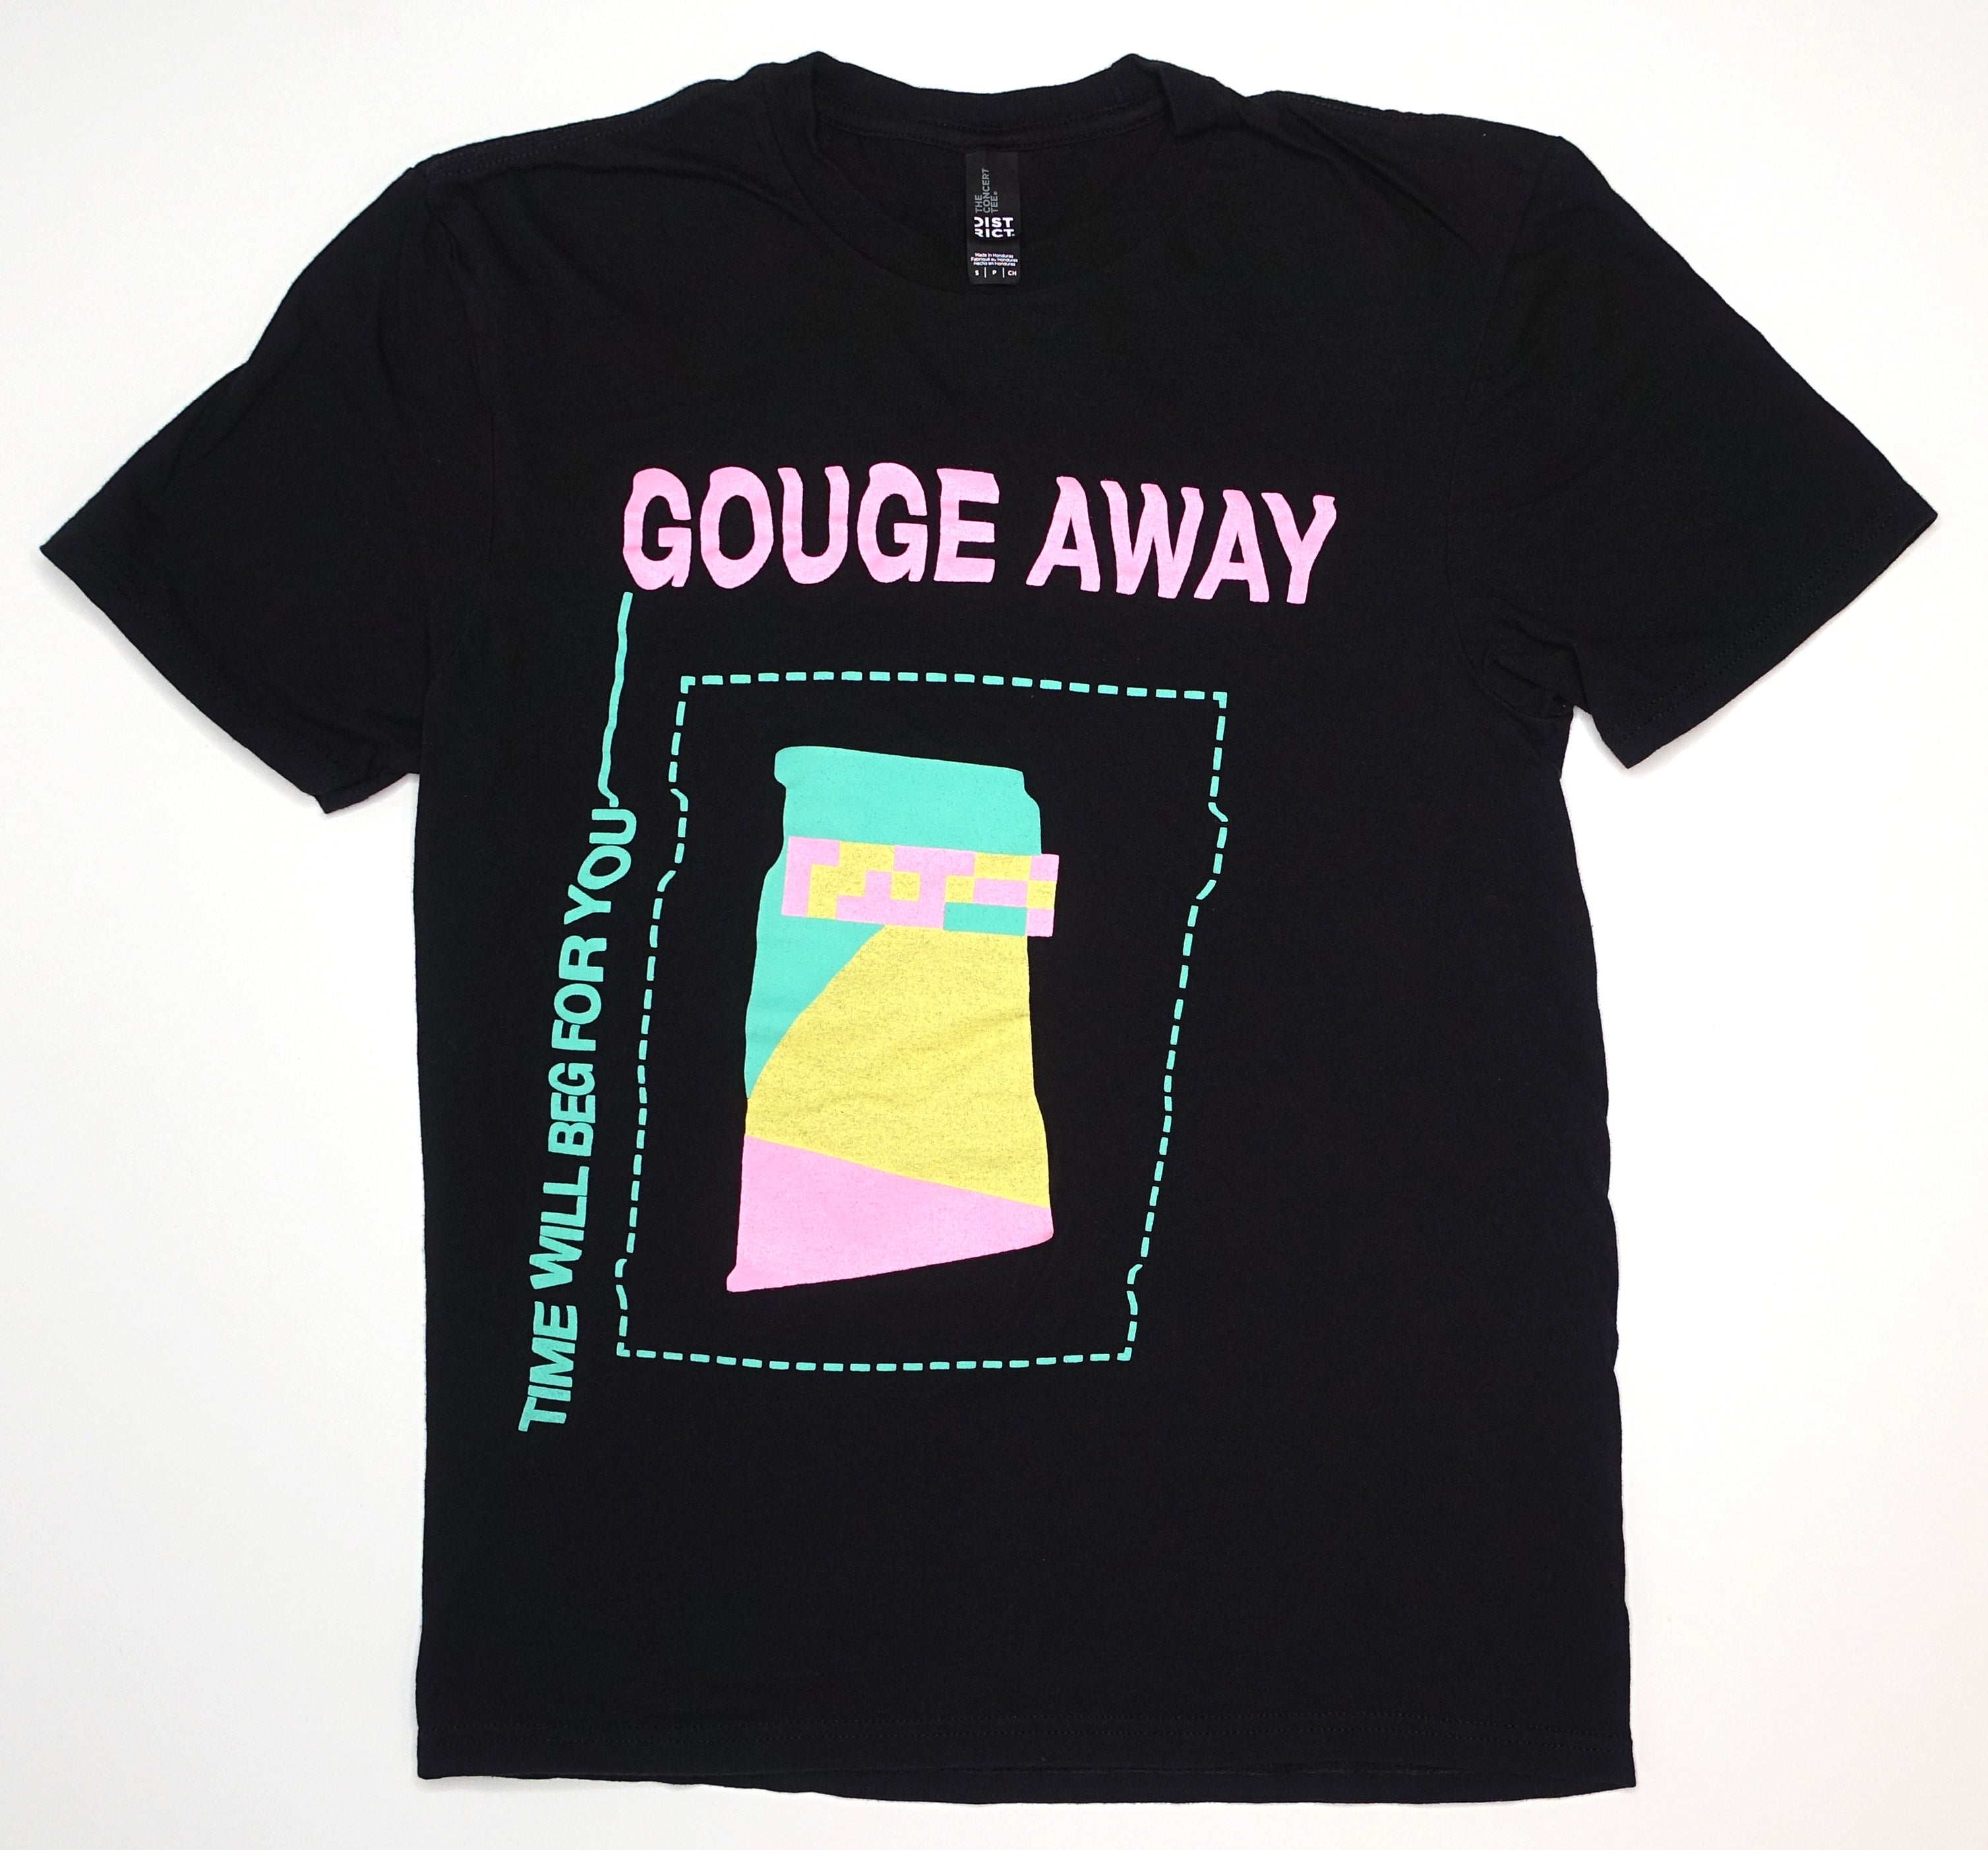 Gouge Away – Time Will Beg For You Tour Shirt Size Small